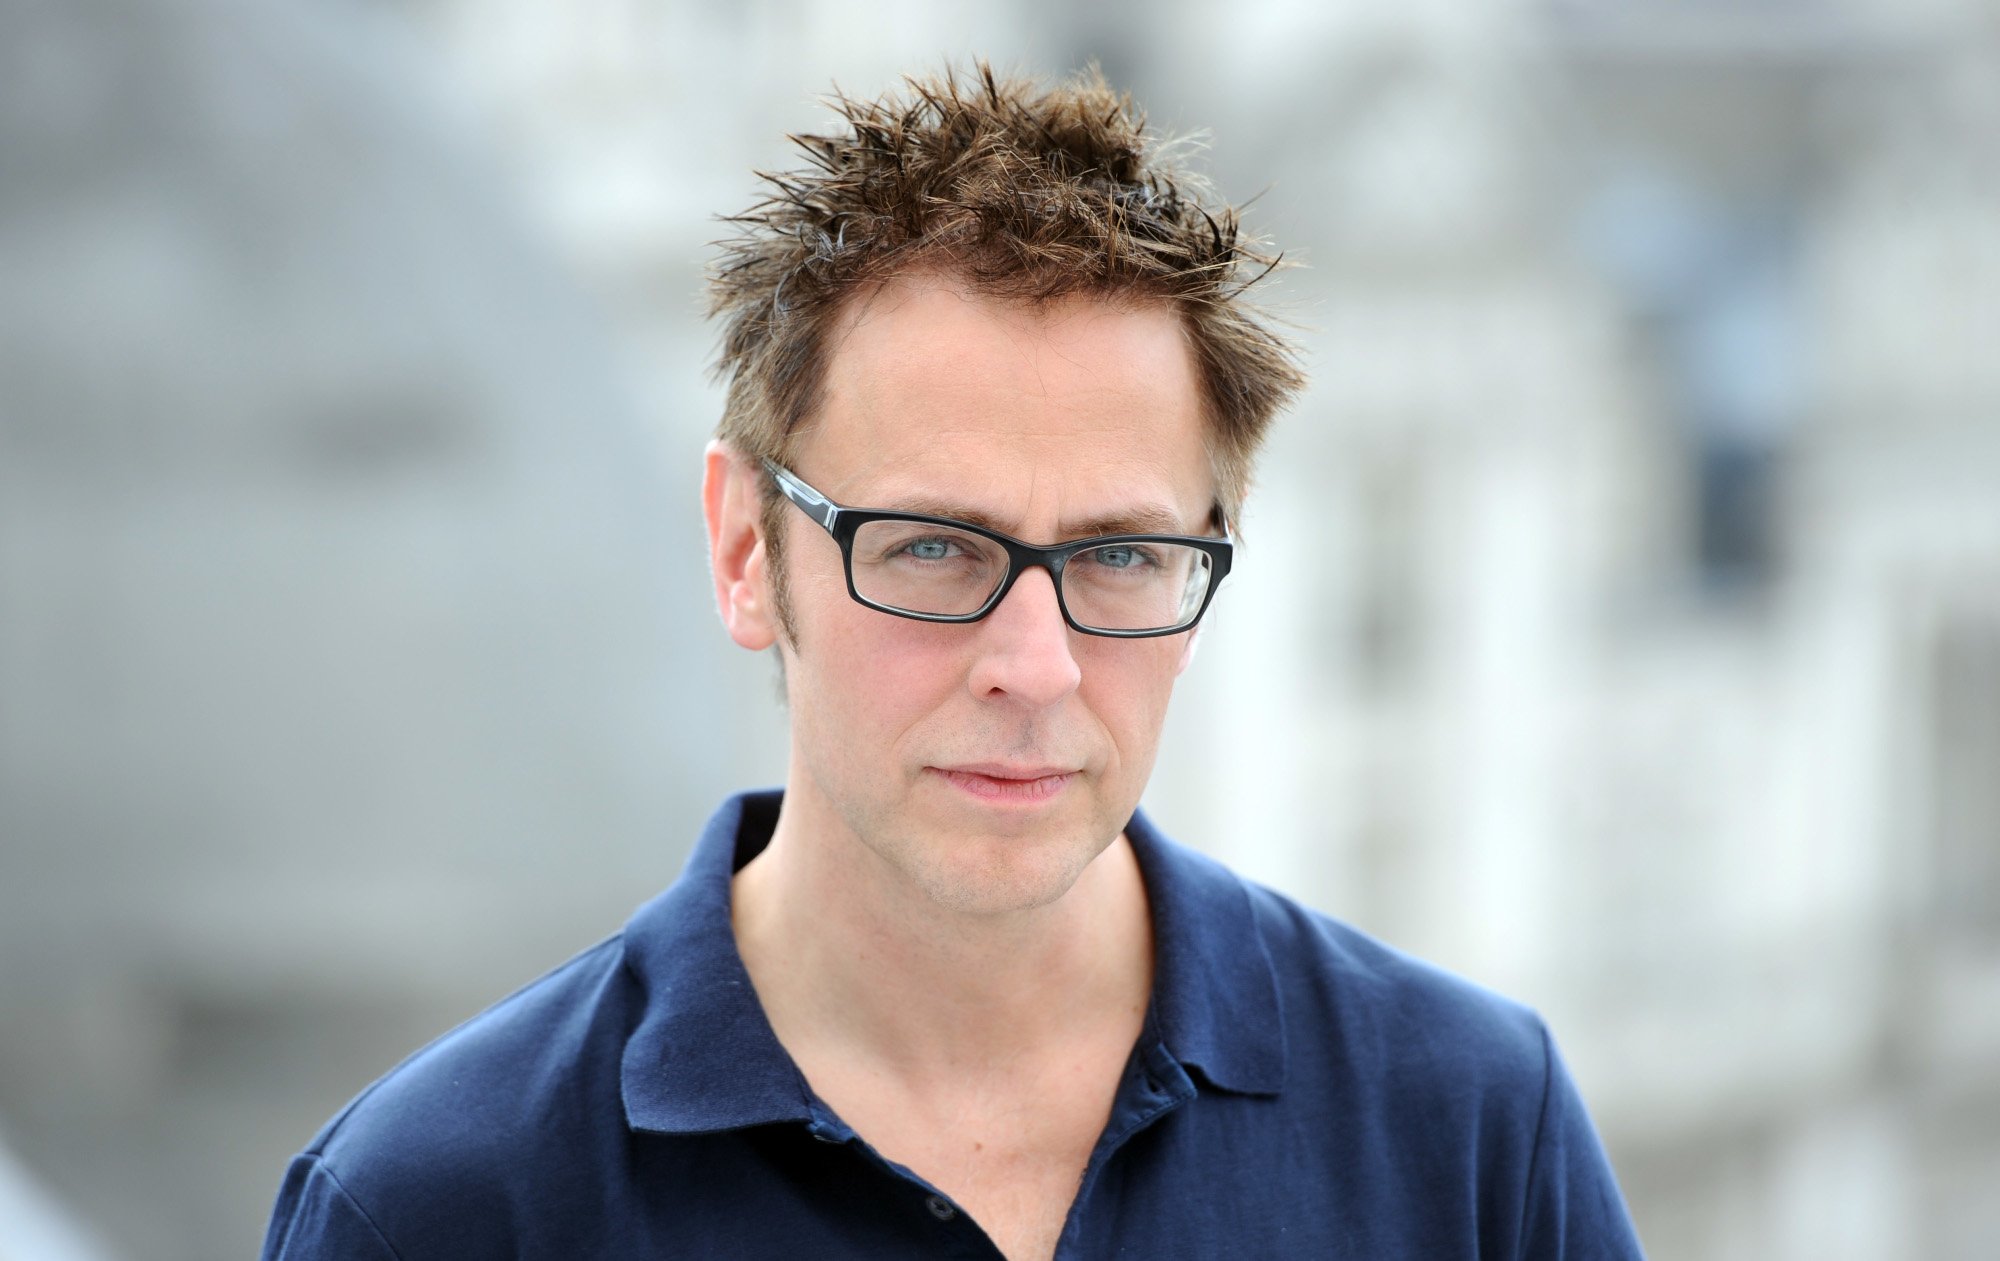 James Gunn, director of the Guardians of the Galaxy holiday special, wears a dark blue shirt and stands in front of a blurred white background